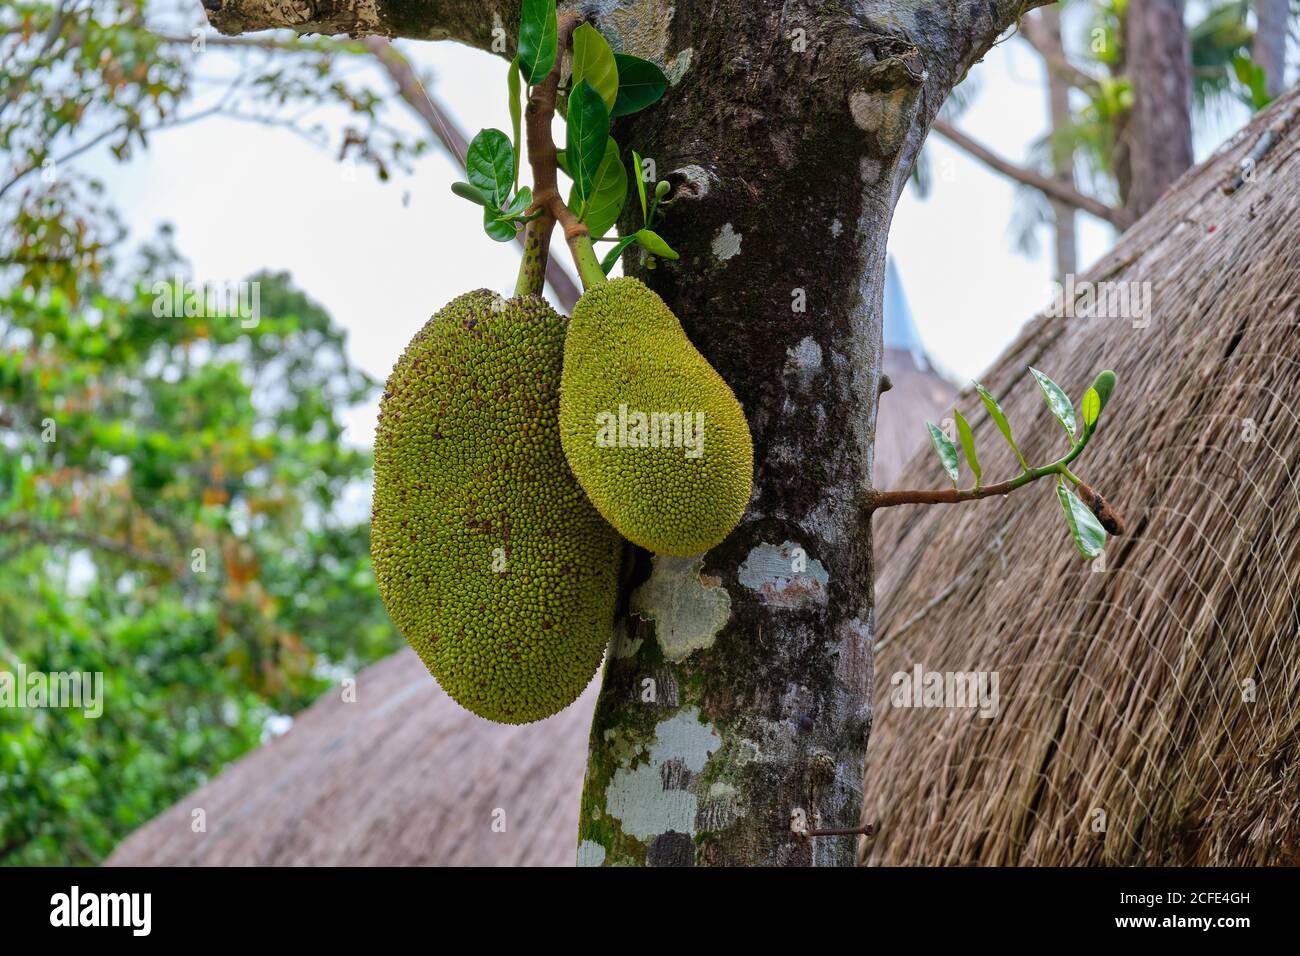 Jackfruit grows in a natural environment on the island of Panay in the Philippines. Stock Photo